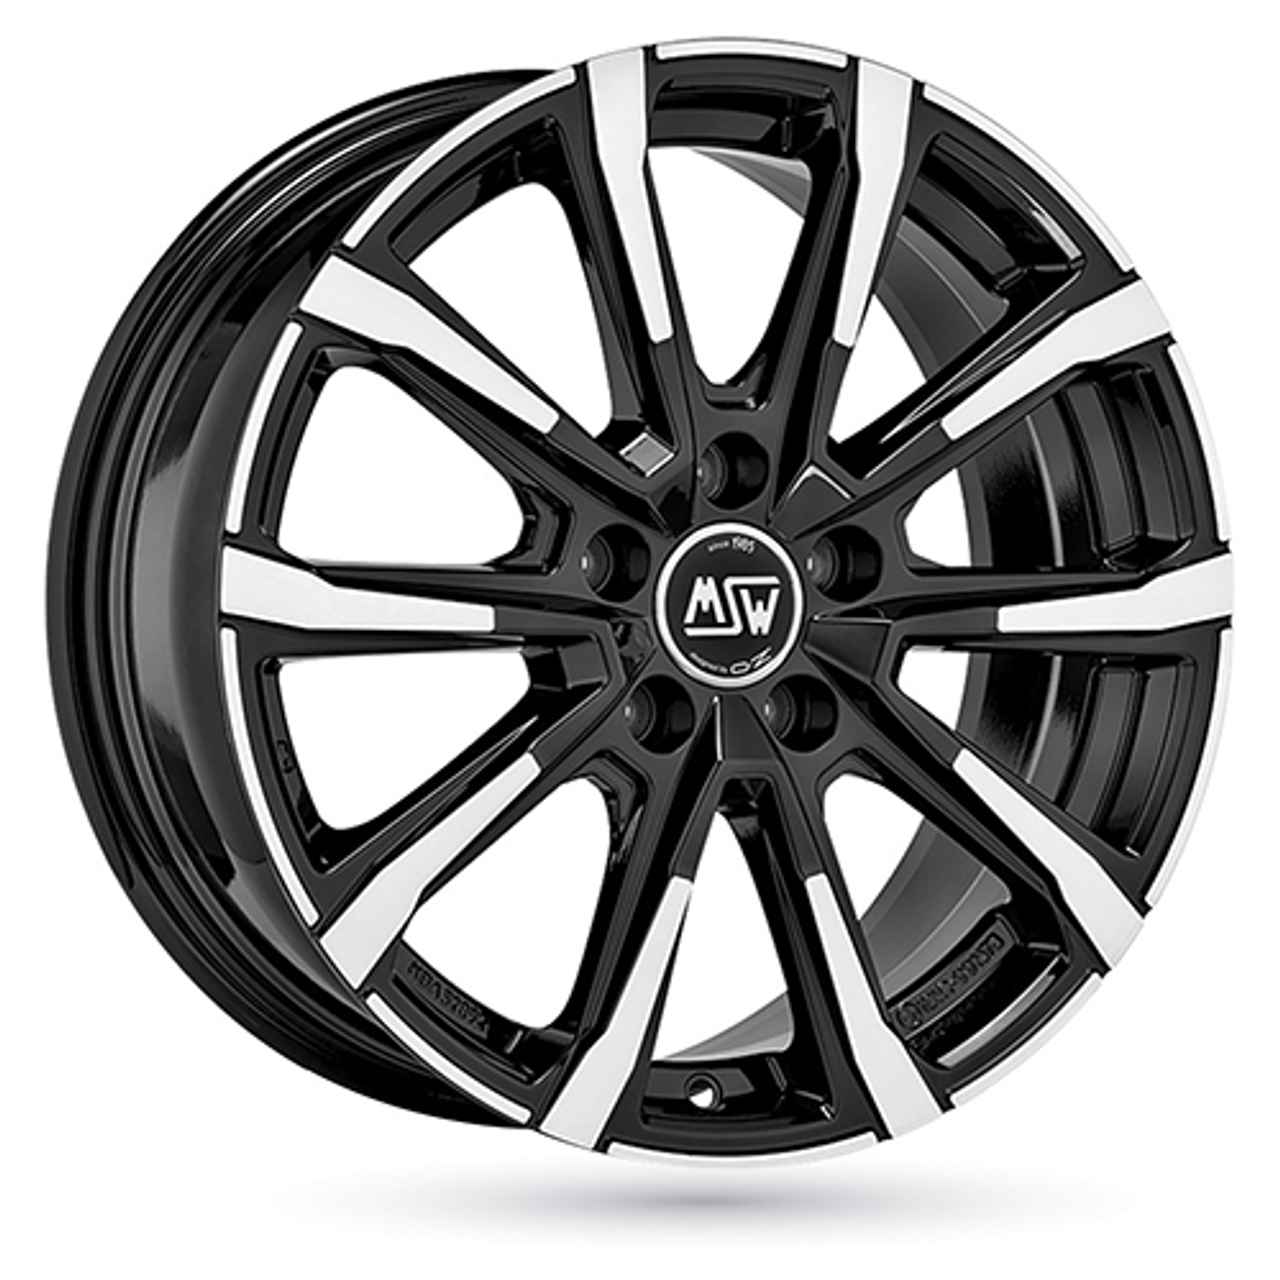 MSW (OZ) MSW 79 gloss black full polished 6.5Jx16 5x112 ET41